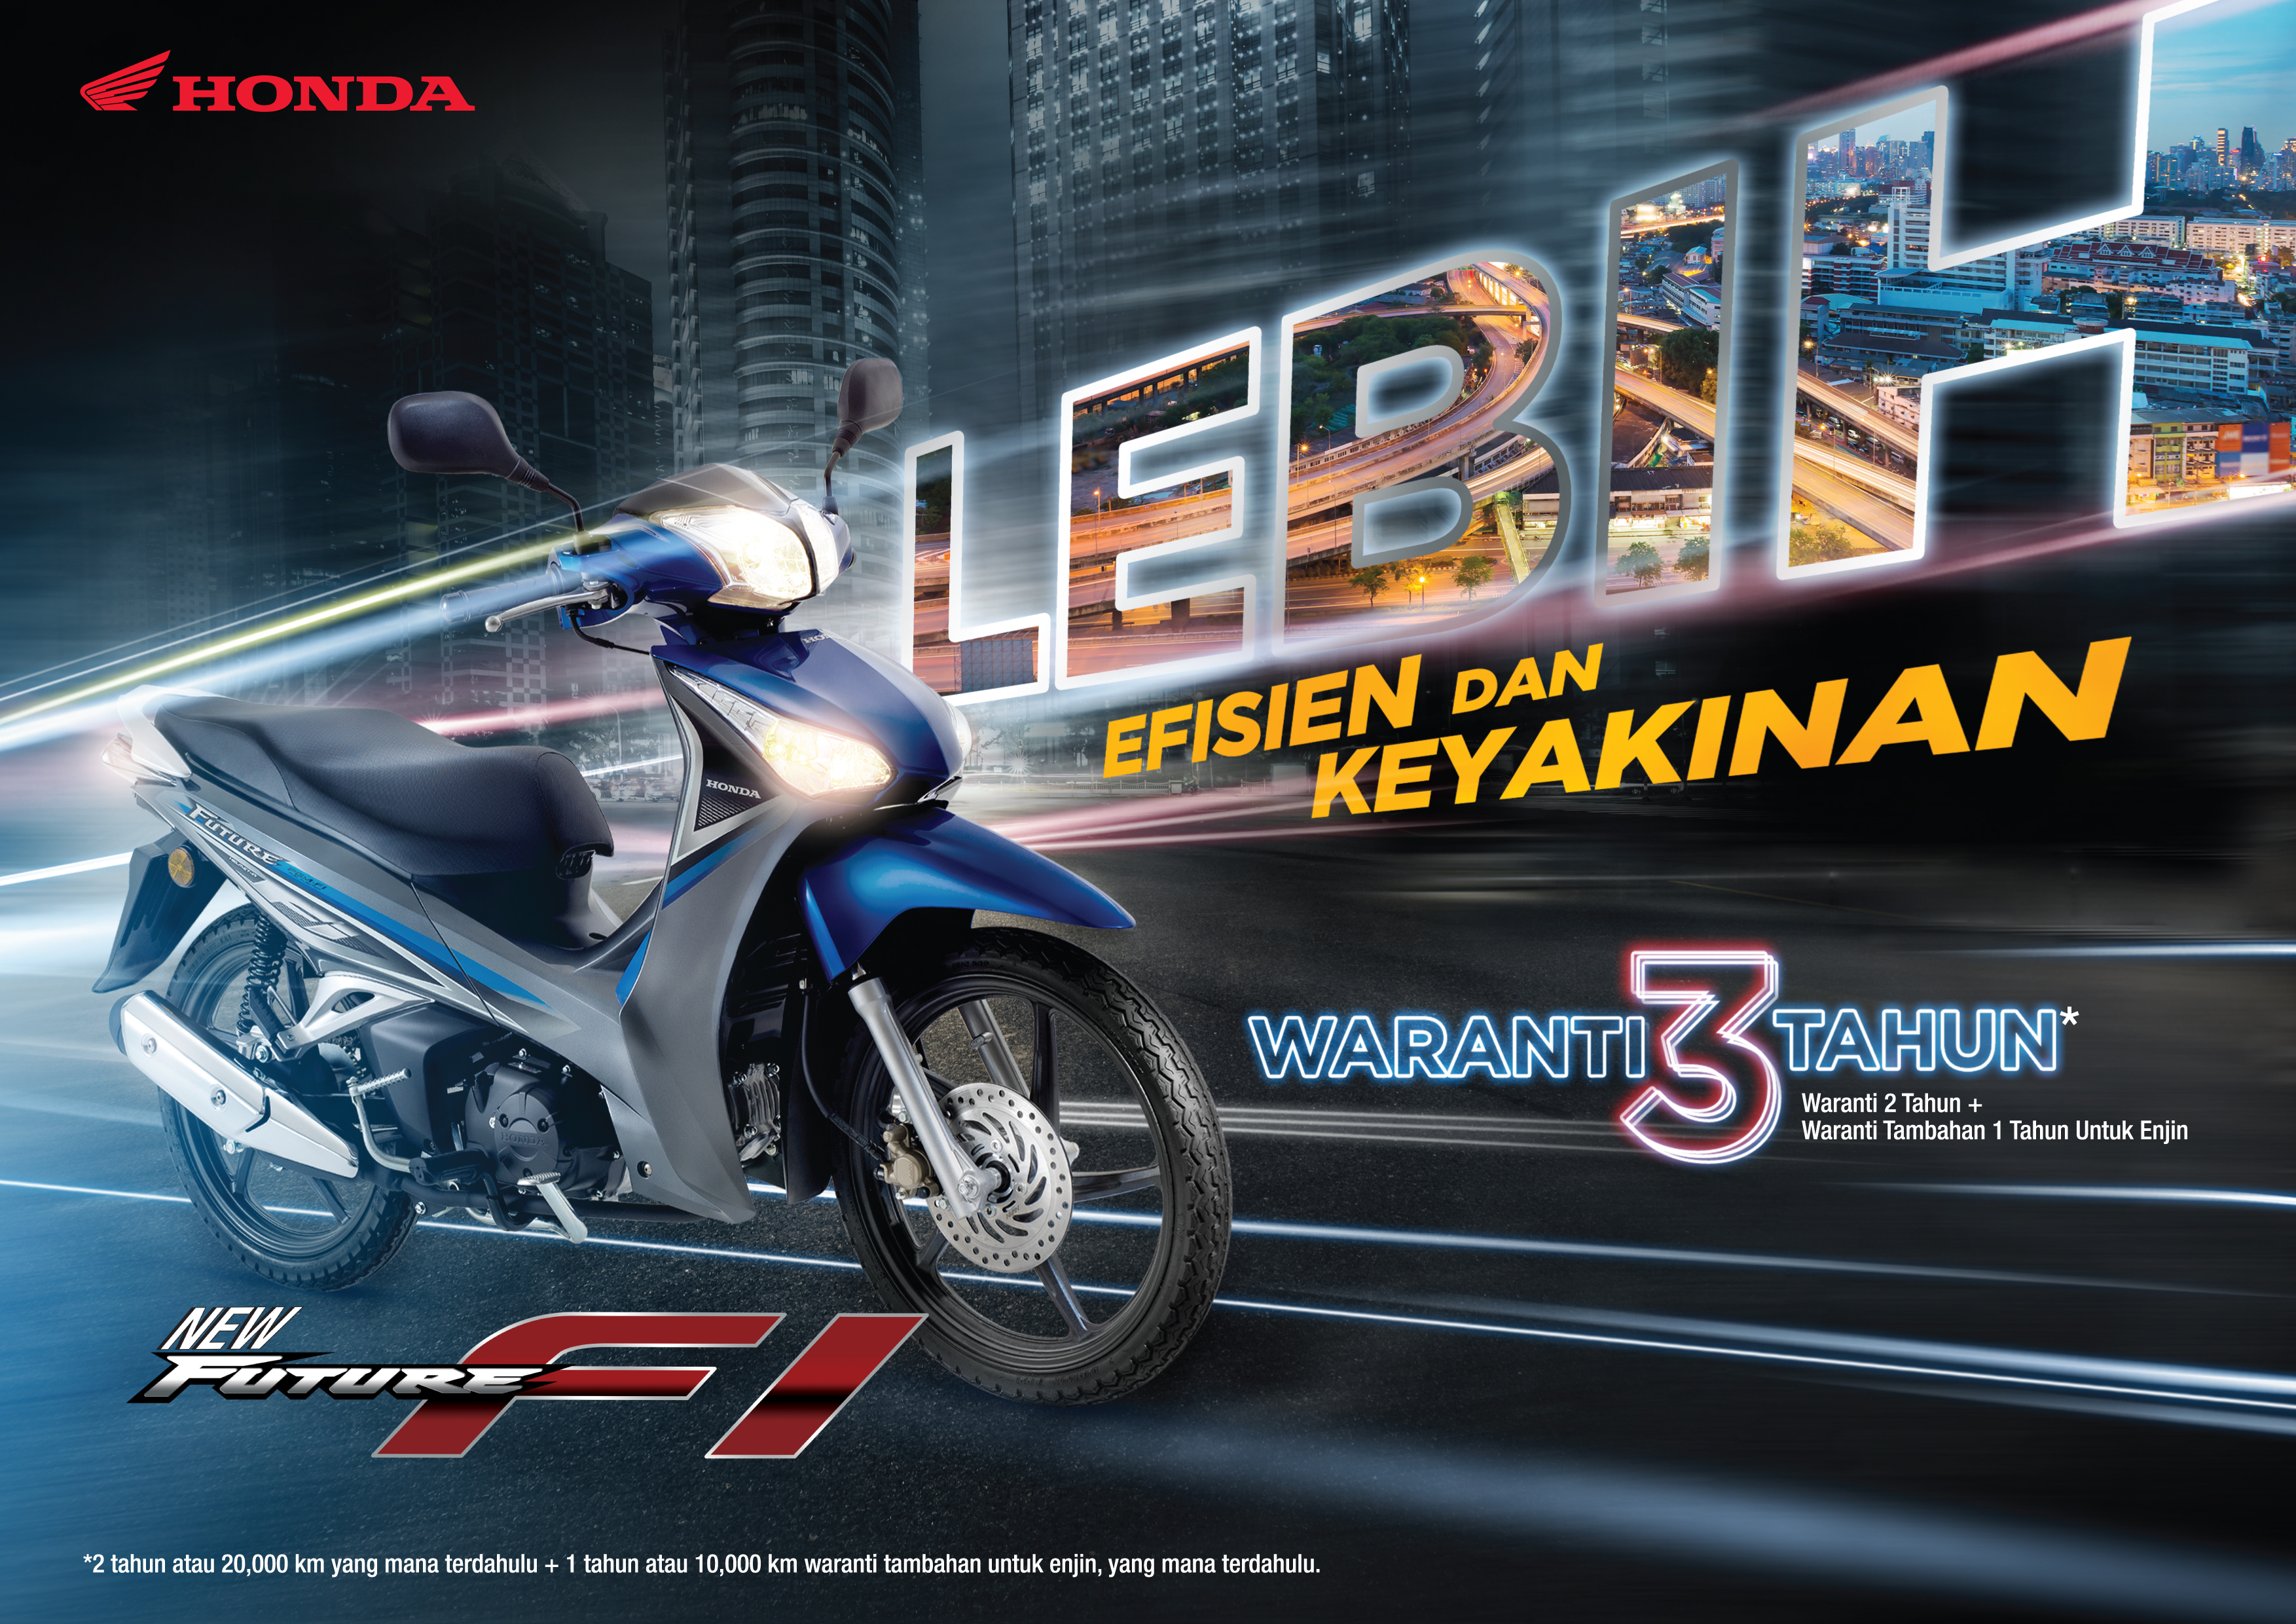 2016 Honda Future FI in new colours - from RM6,072